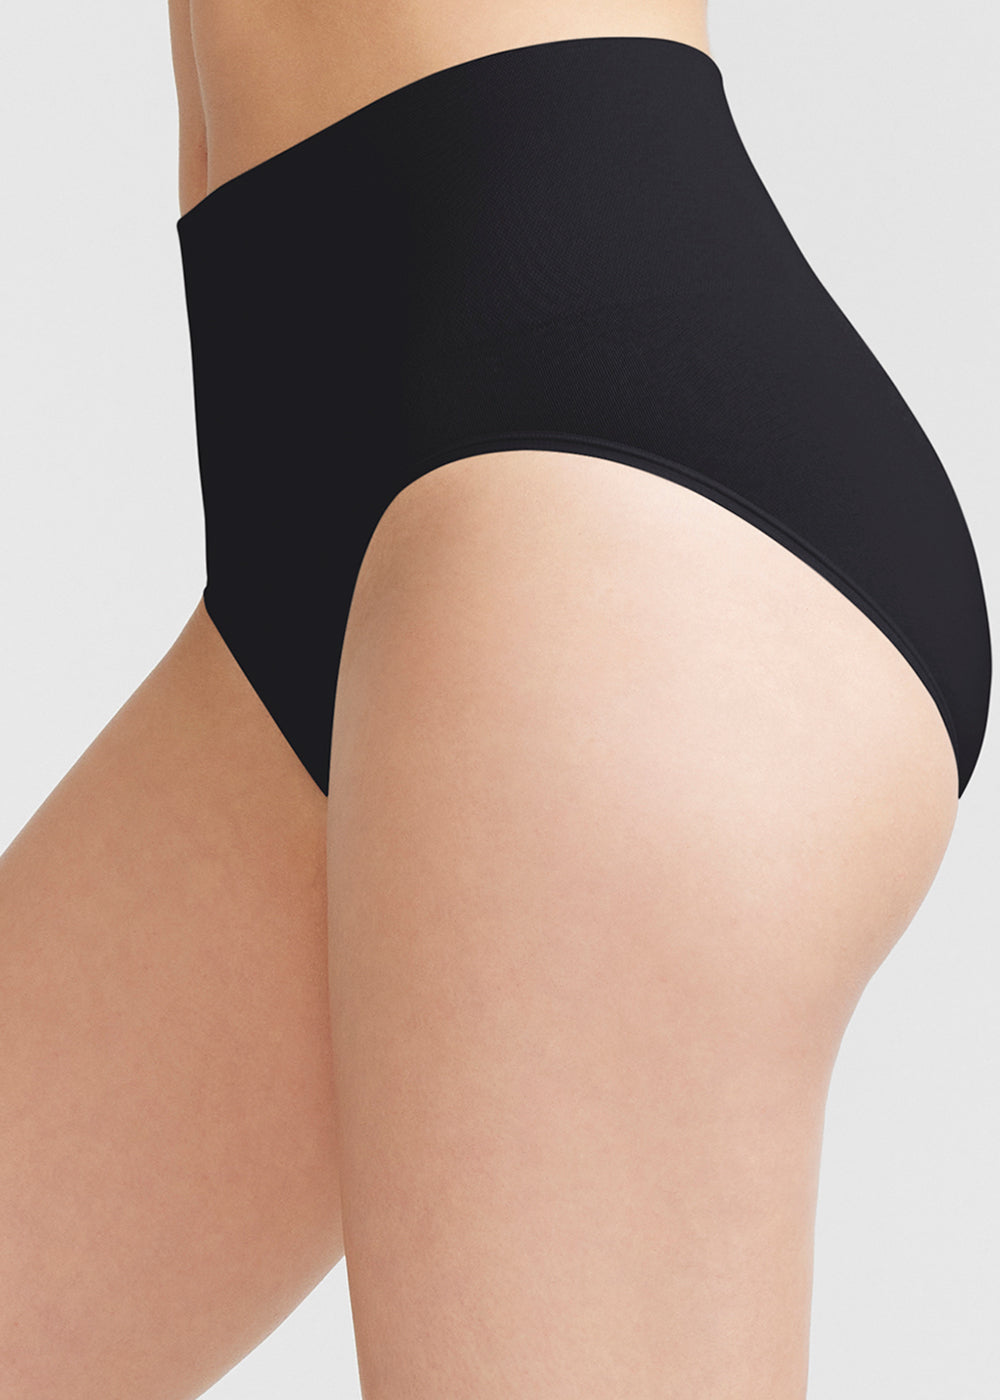 sage shaping brief - seamless in Black worn by woman standing on side Yummie